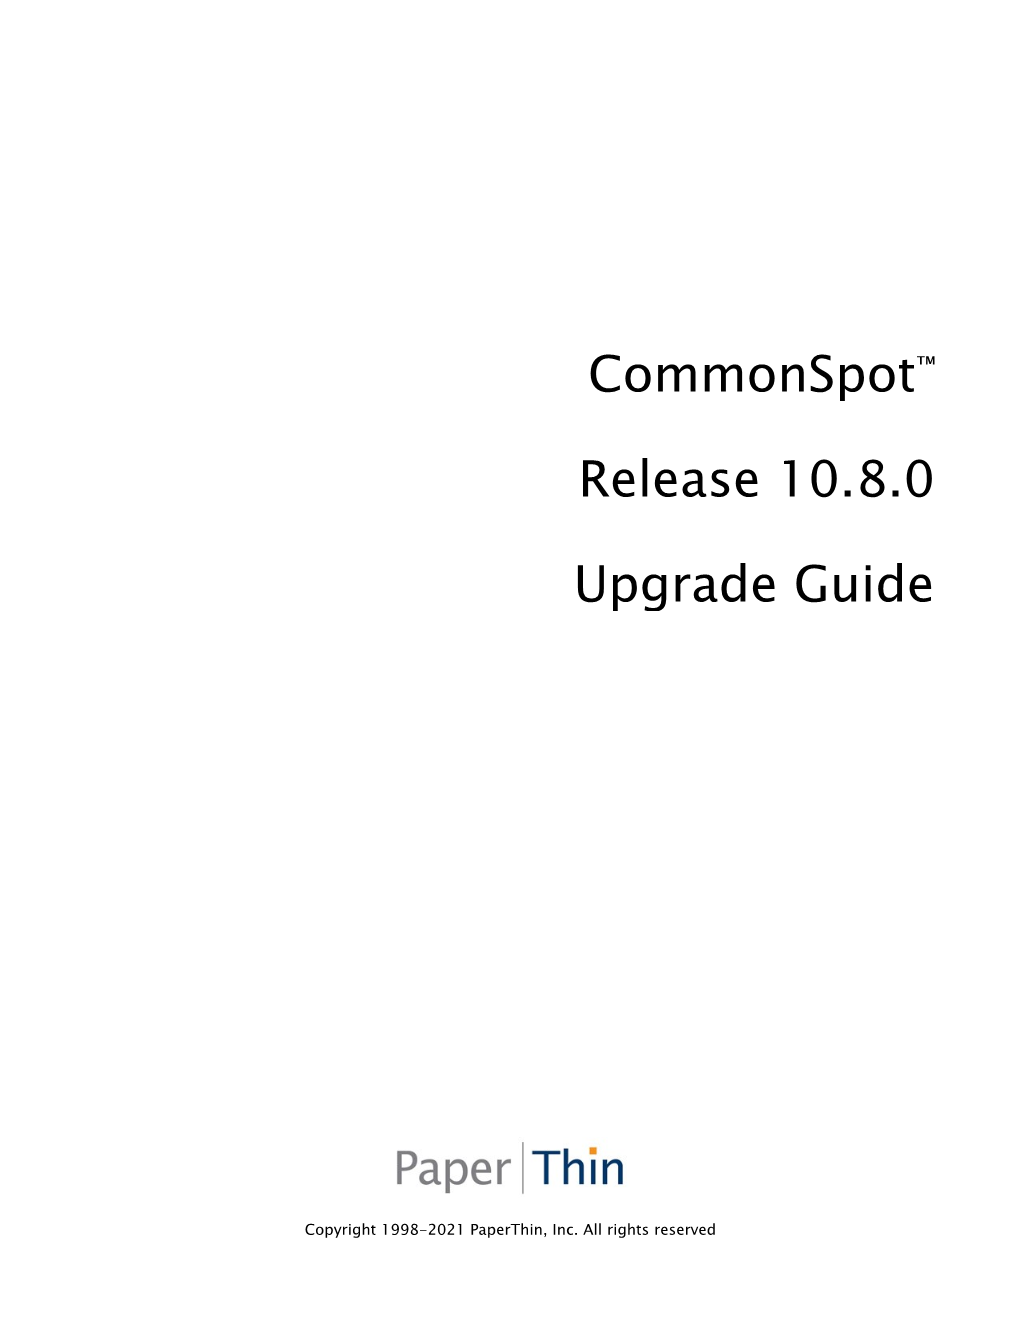 Commonspot™ Release 10.8.0 Upgrade Guide